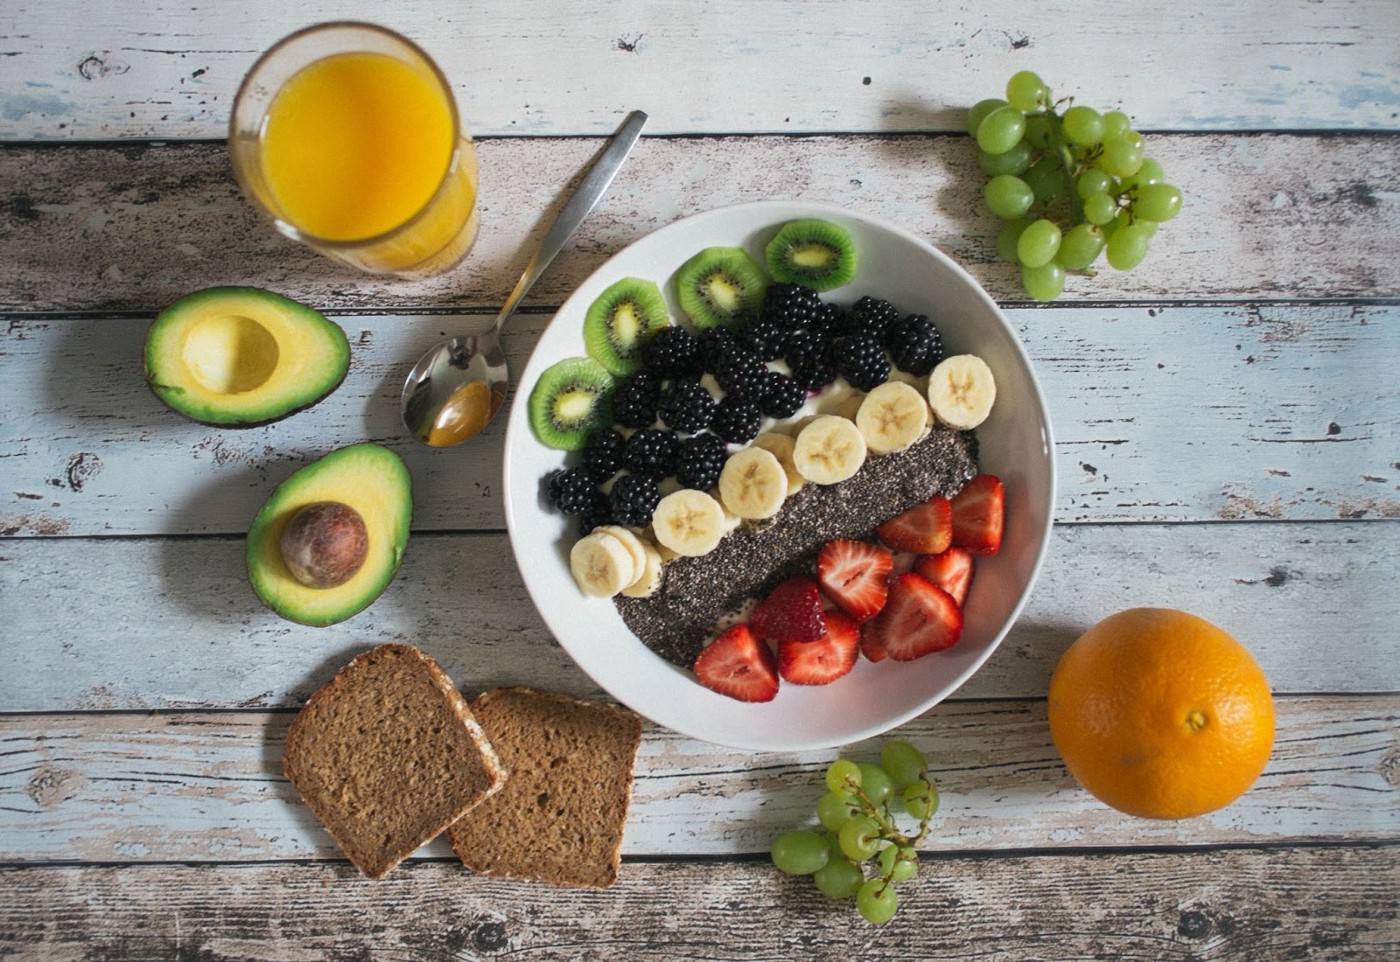 A bowl of fruits and chia seeds with other fruits, bread and juices besides it.